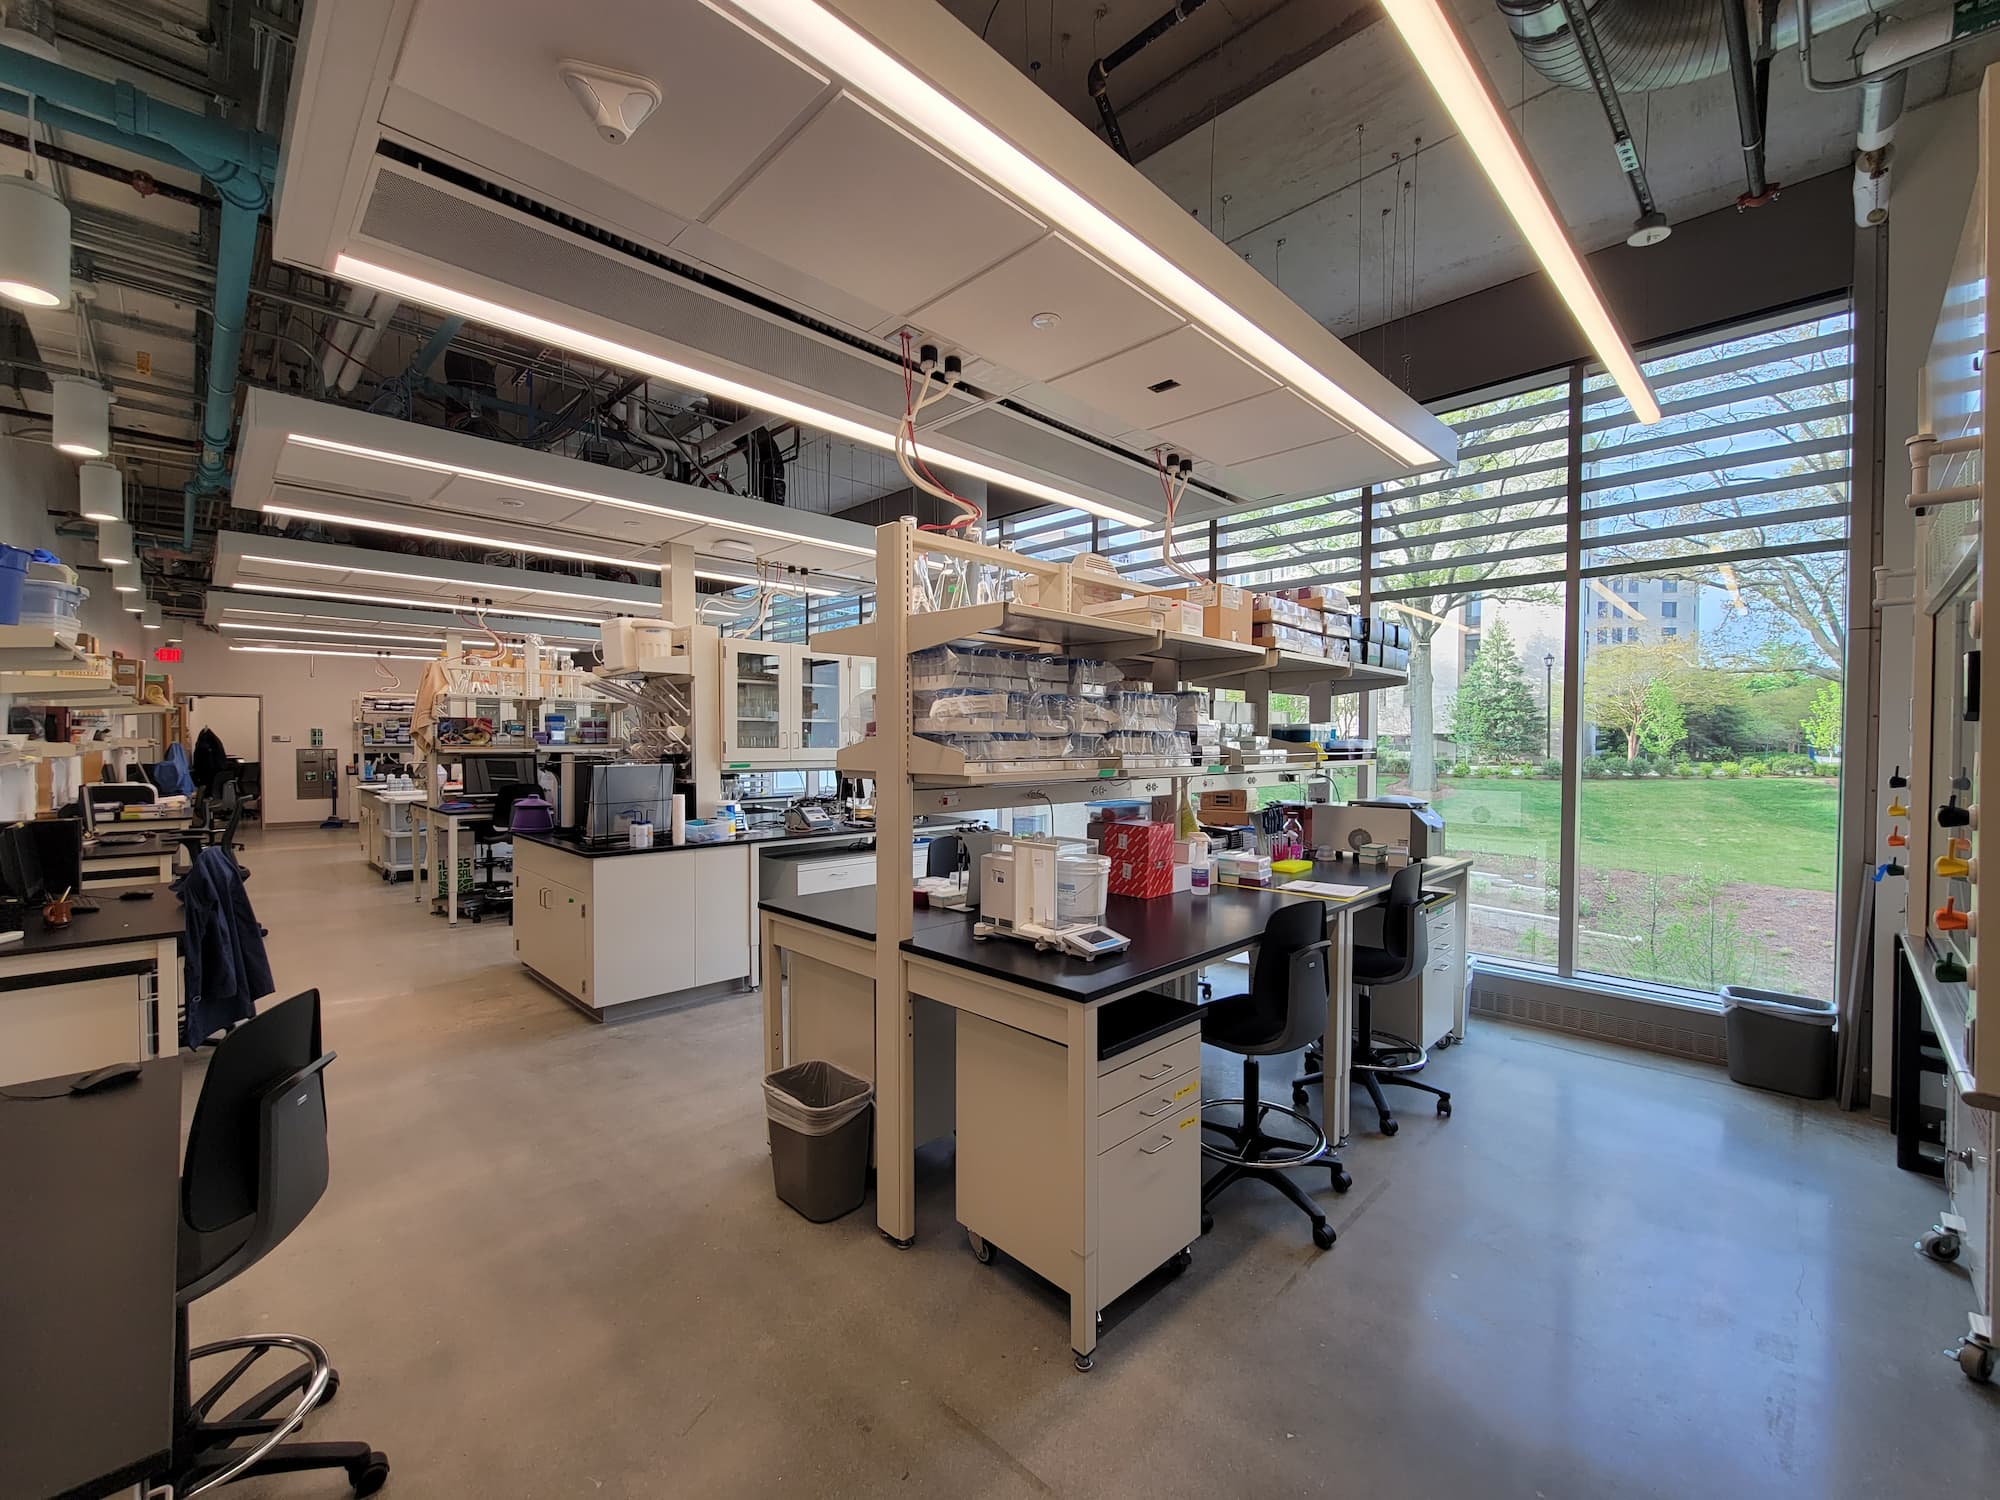 Laboratory in the new Hall of Science